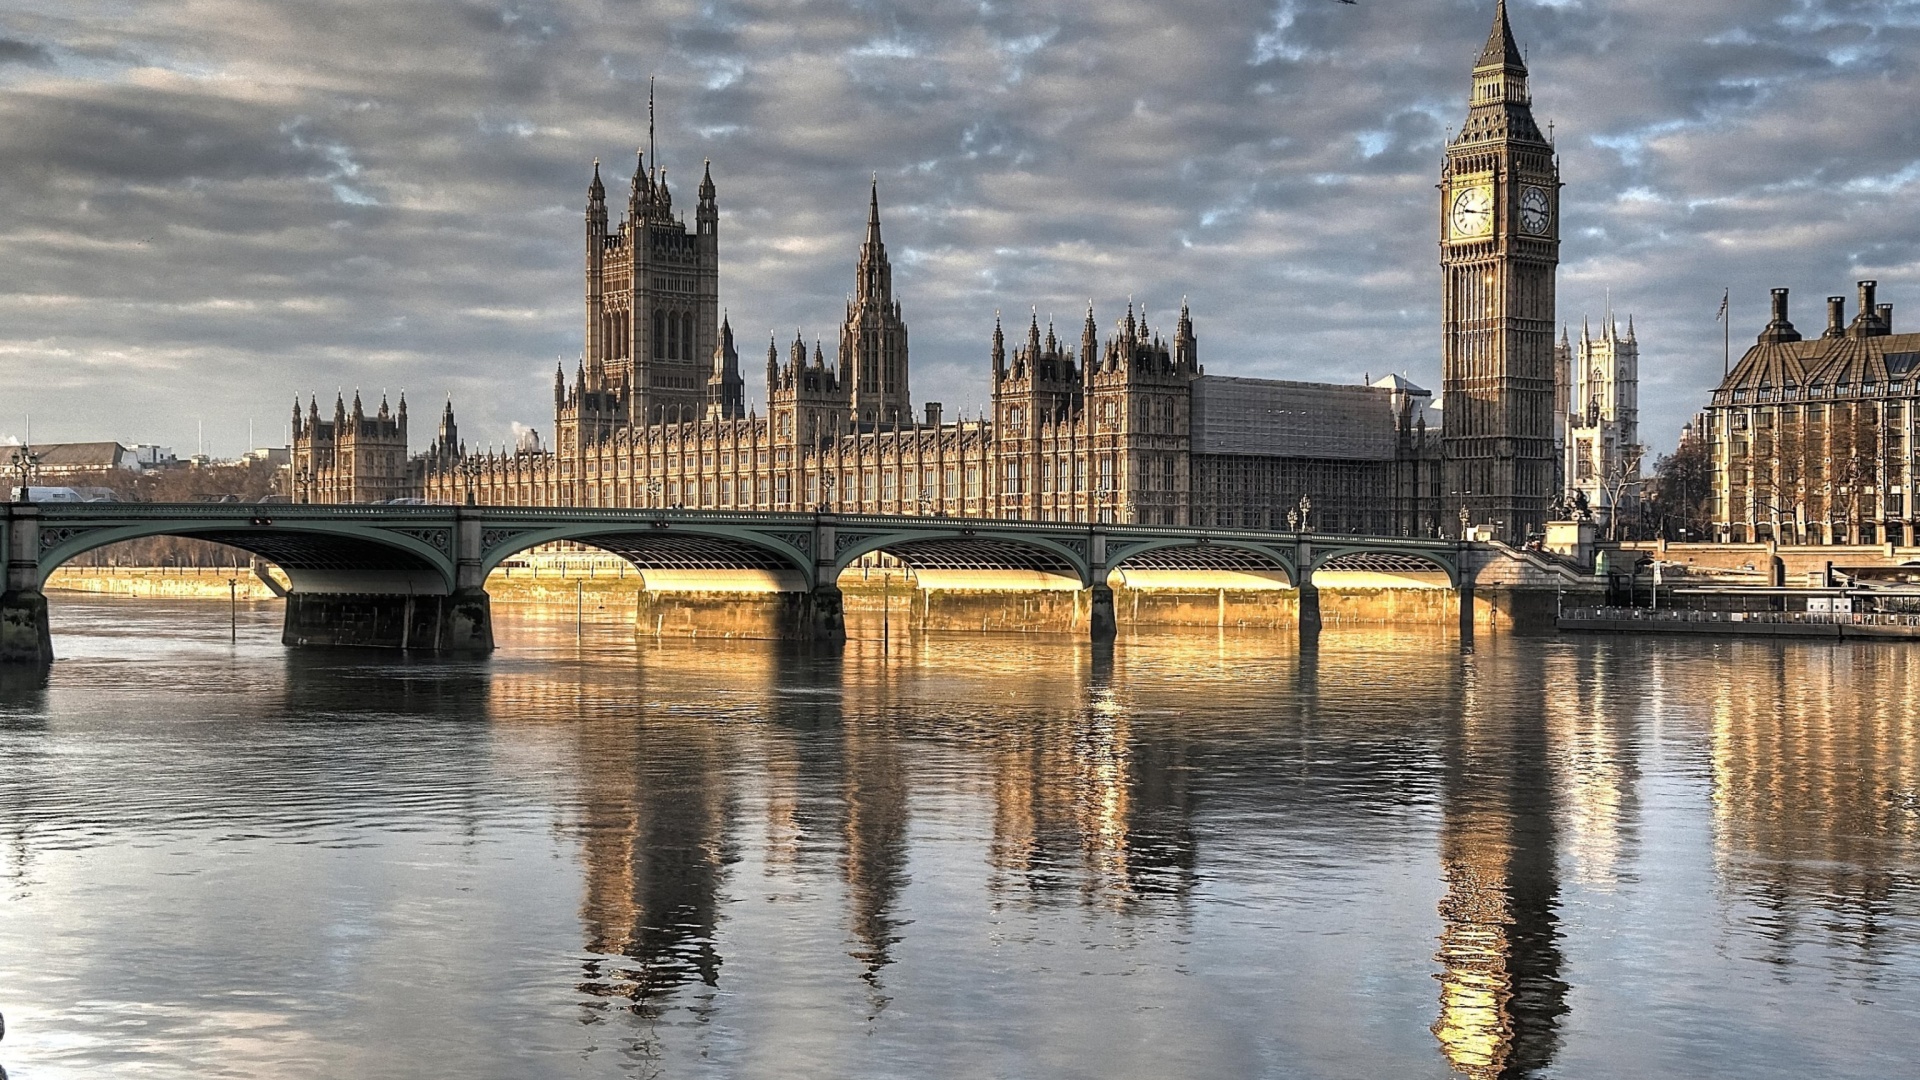 Palace of Westminster in London wallpaper 1920x1080